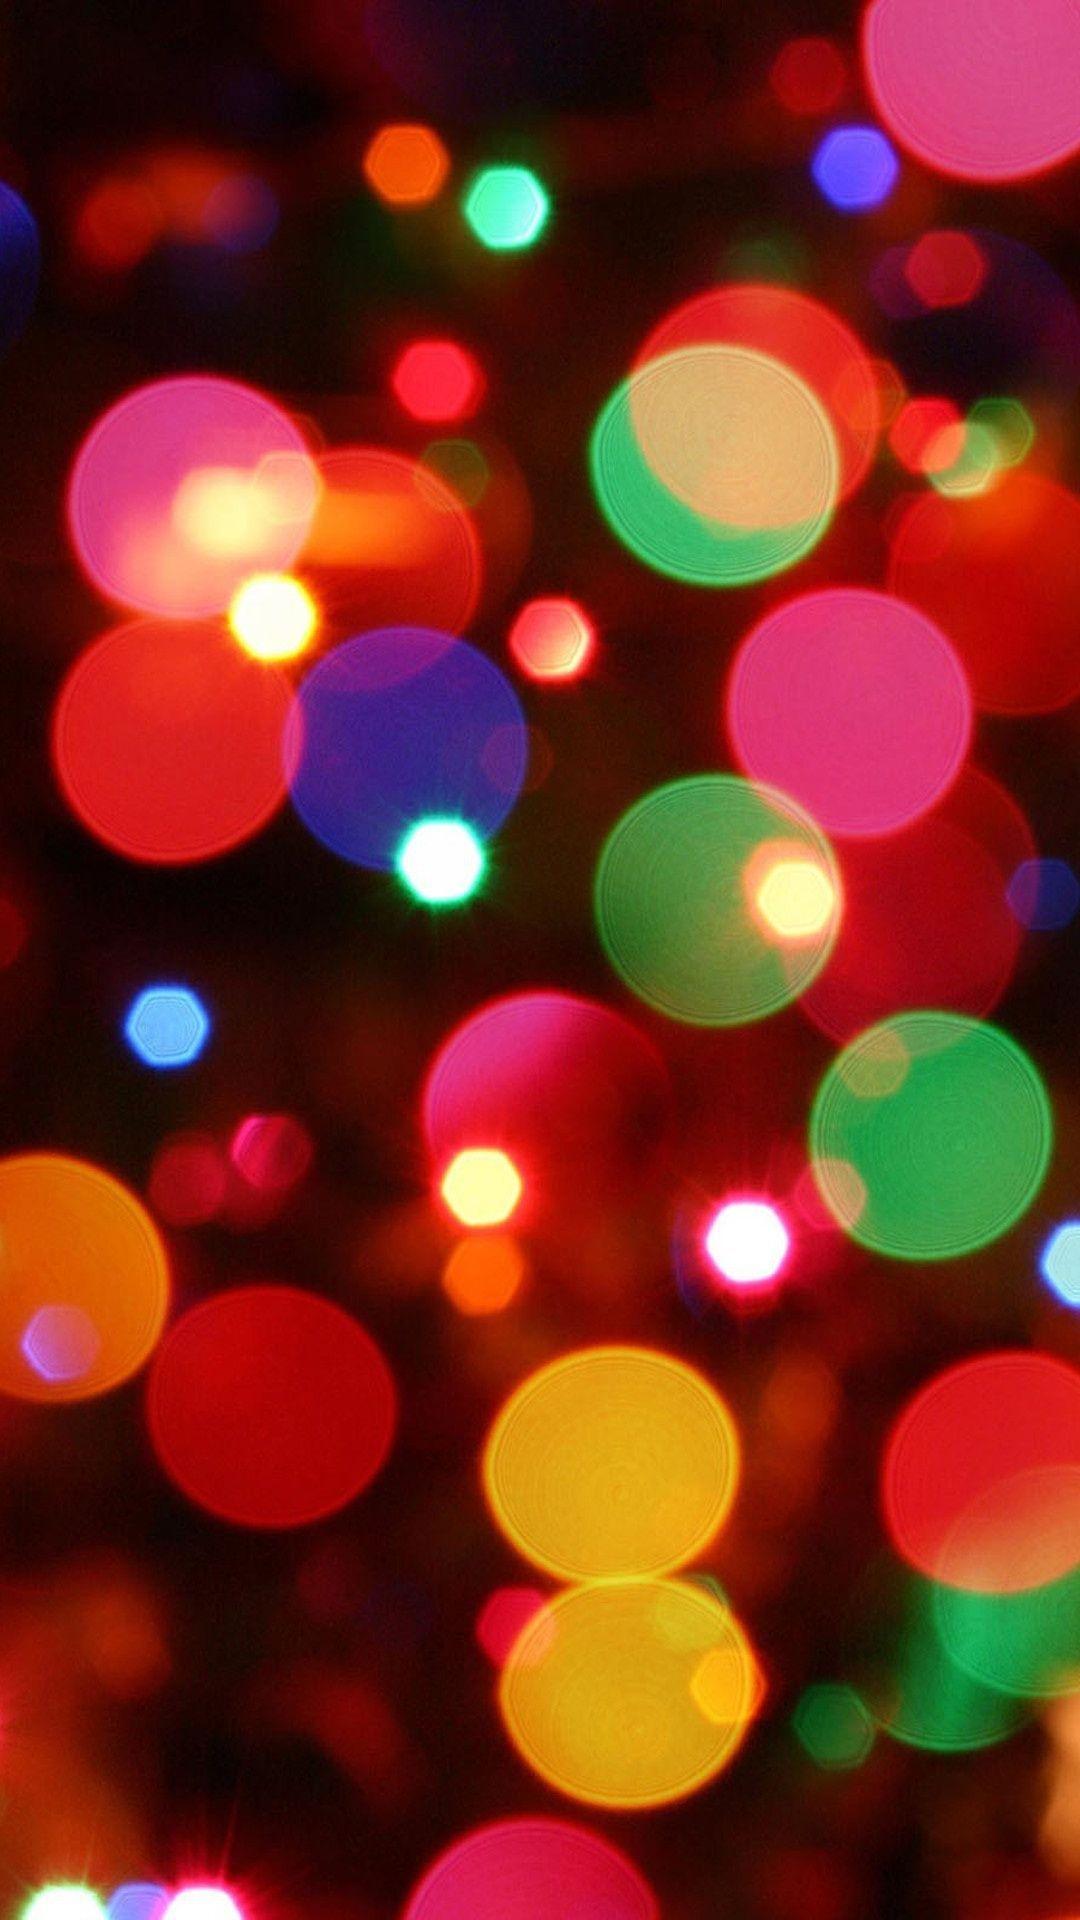 Colorful Lights Wallpapers - Top Free Colorful Lights Backgrounds ...